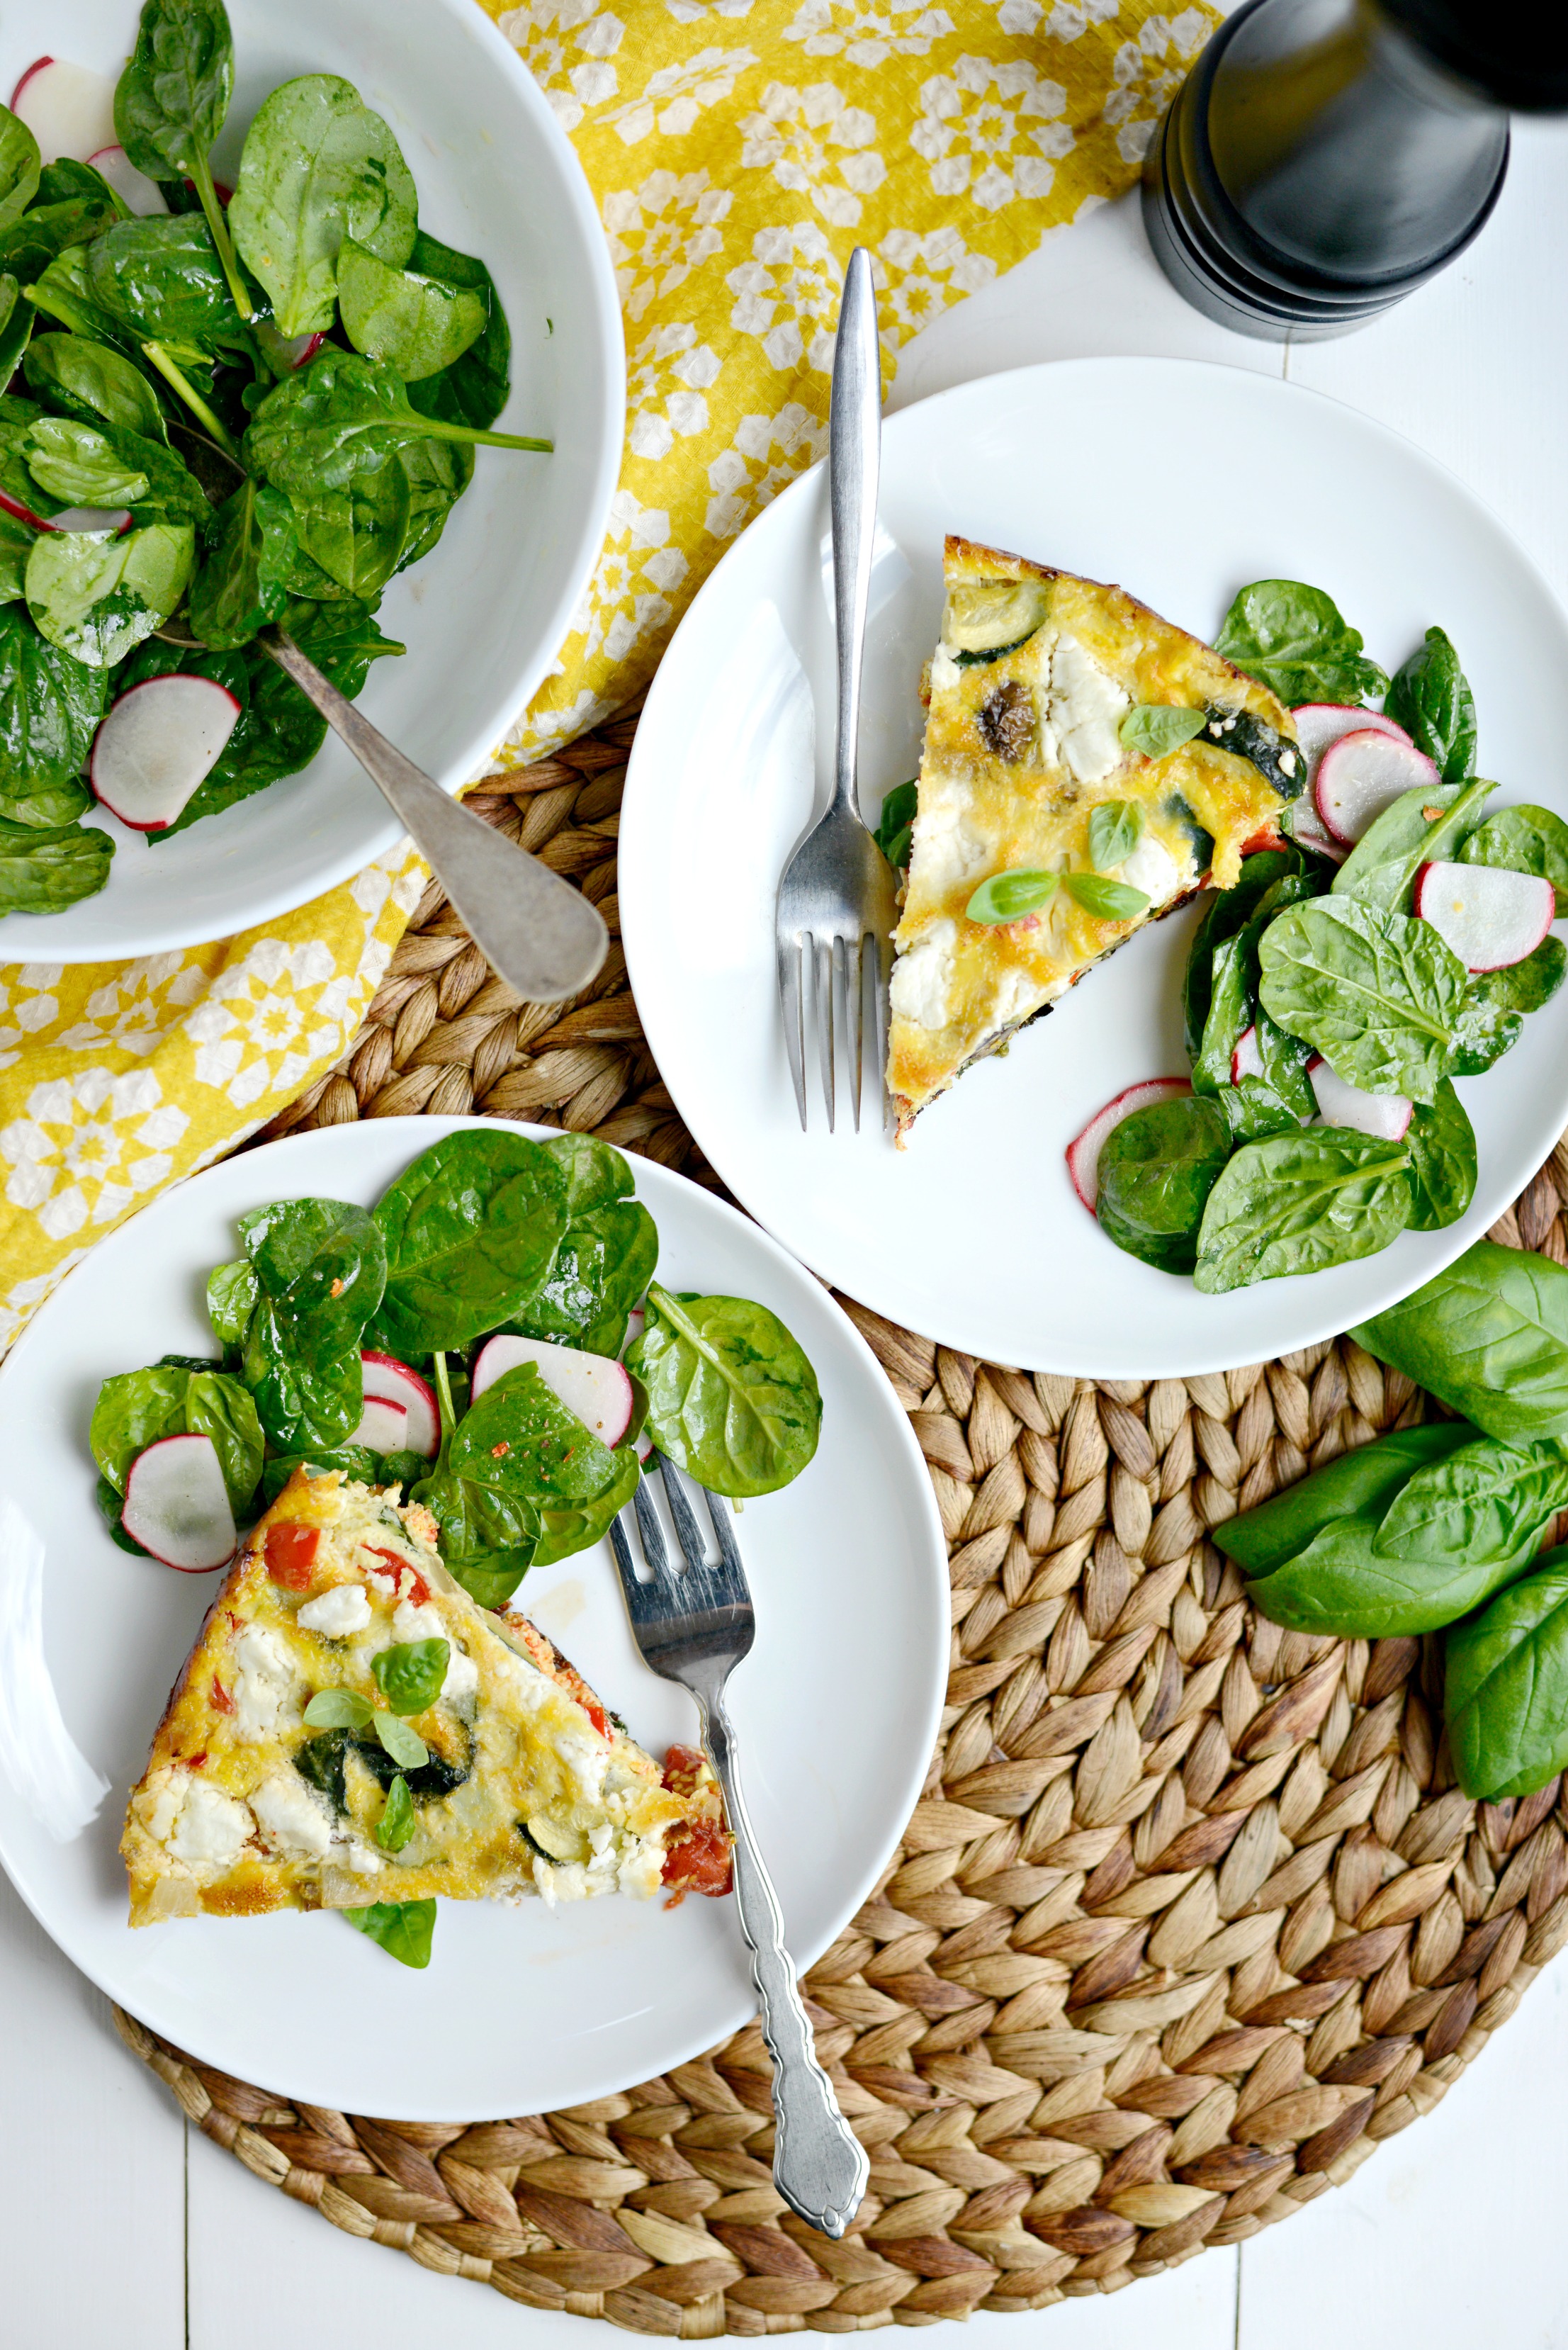 https://www.simplyscratch.com/wp-content/uploads/2016/04/Vegetable-Goat-Cheese-Frittata-l-SimplyScratch.com-12.jpg